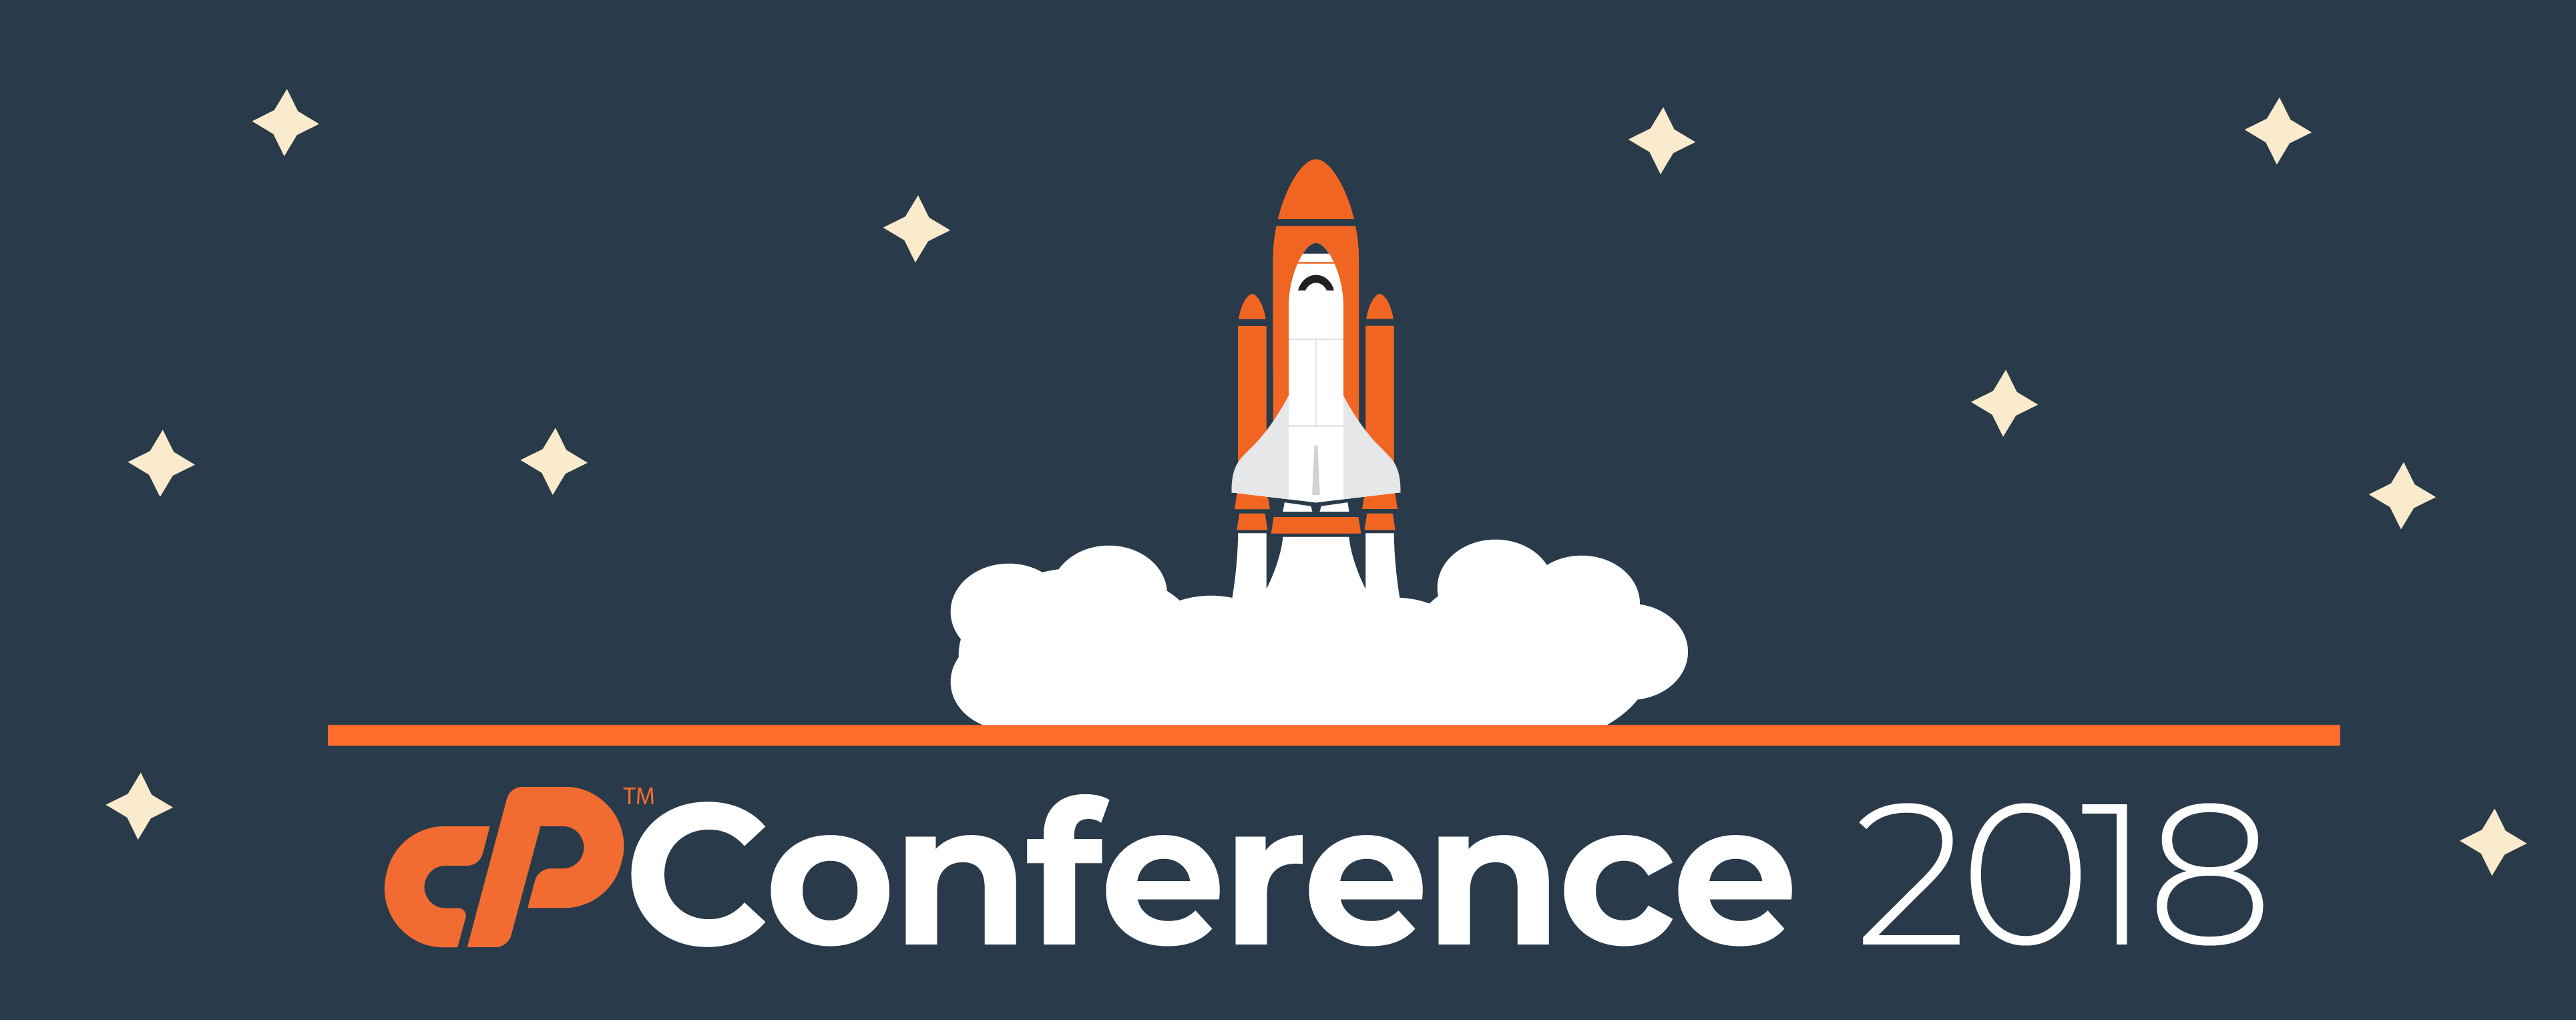 5 Reasons Why You Shouldn’t Miss cPanel Conference 2018